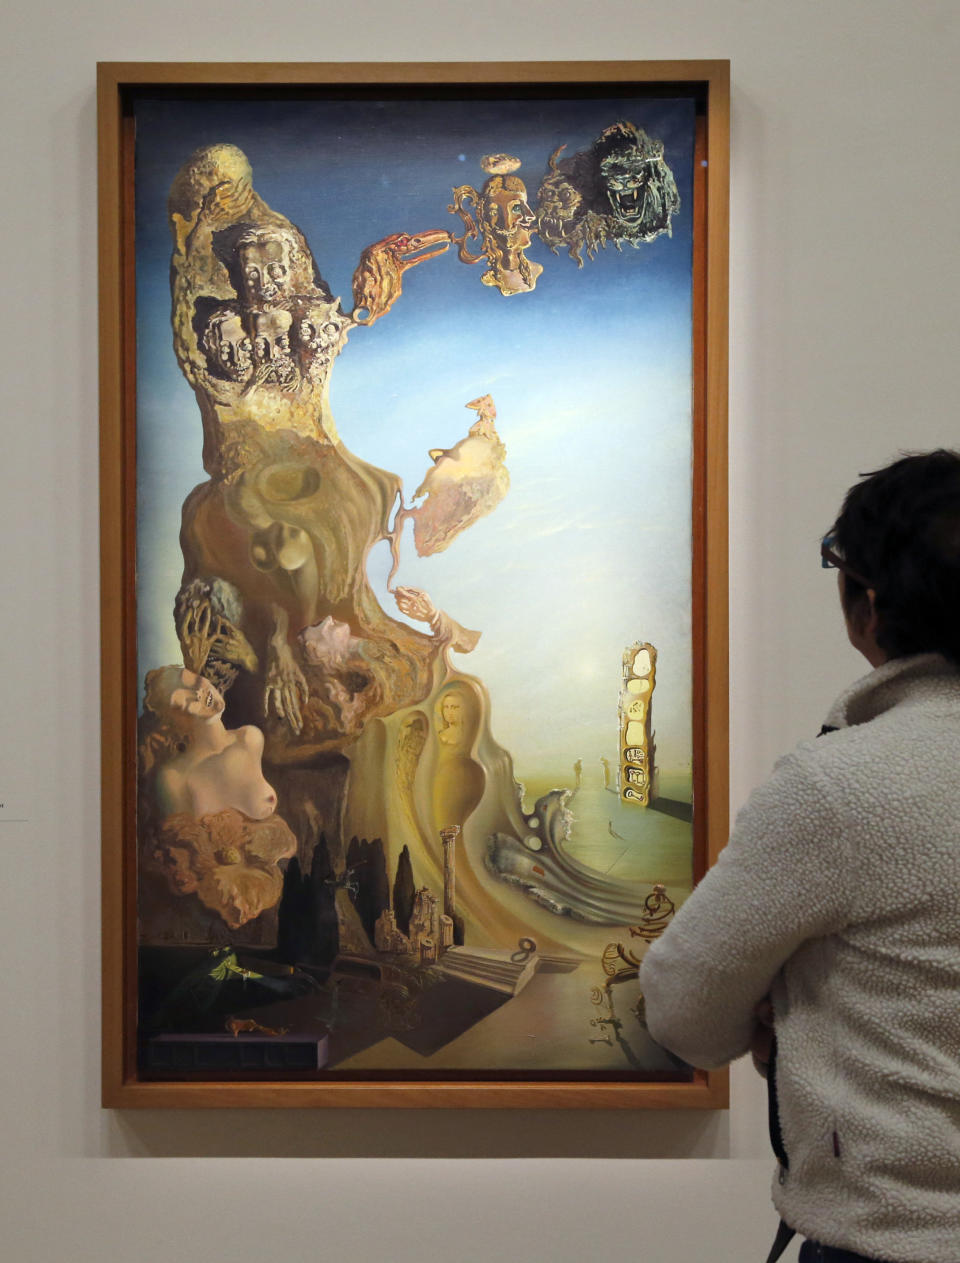 A visitor looks at a painting entitled 'Monument imperial à la femme-enfant' (Imperial Monument to the Child Woman) by Spanish surrealist artist Salvador Dali's during an exhibition devoted to his work at the Centre Pompidou contemporary art center (aka Beaubourg) on November 19, 2012 in Paris. More than 30 years after the first retrospective in 1979, the event gathers more than 200 art pieces and runs until March 13, 2013. (FRANCOIS GUILLOT/AFP/Getty Images)